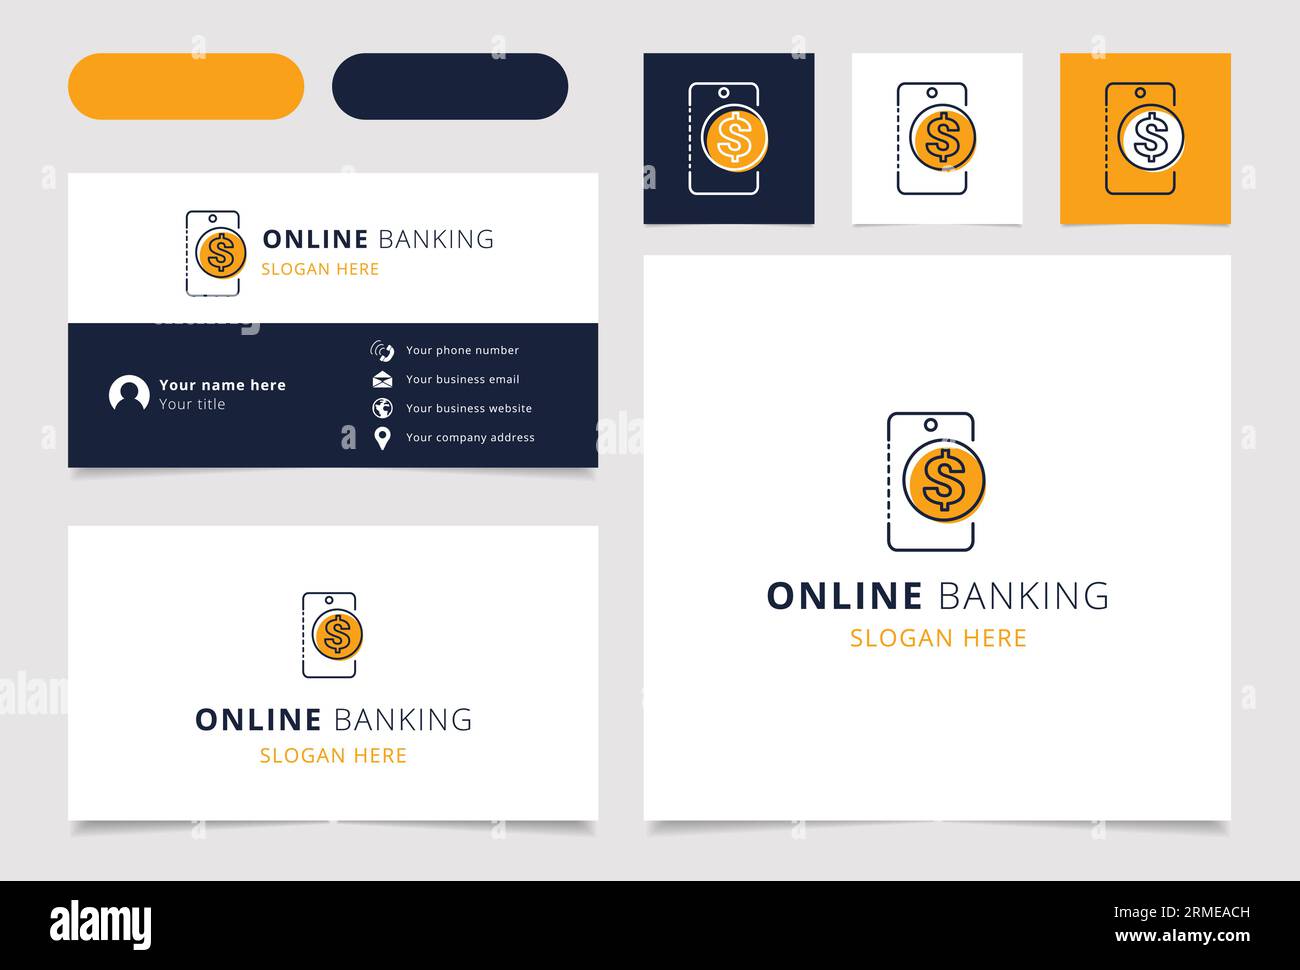 Online banking logo design with editable slogan. Branding book and business card template. Stock Vector